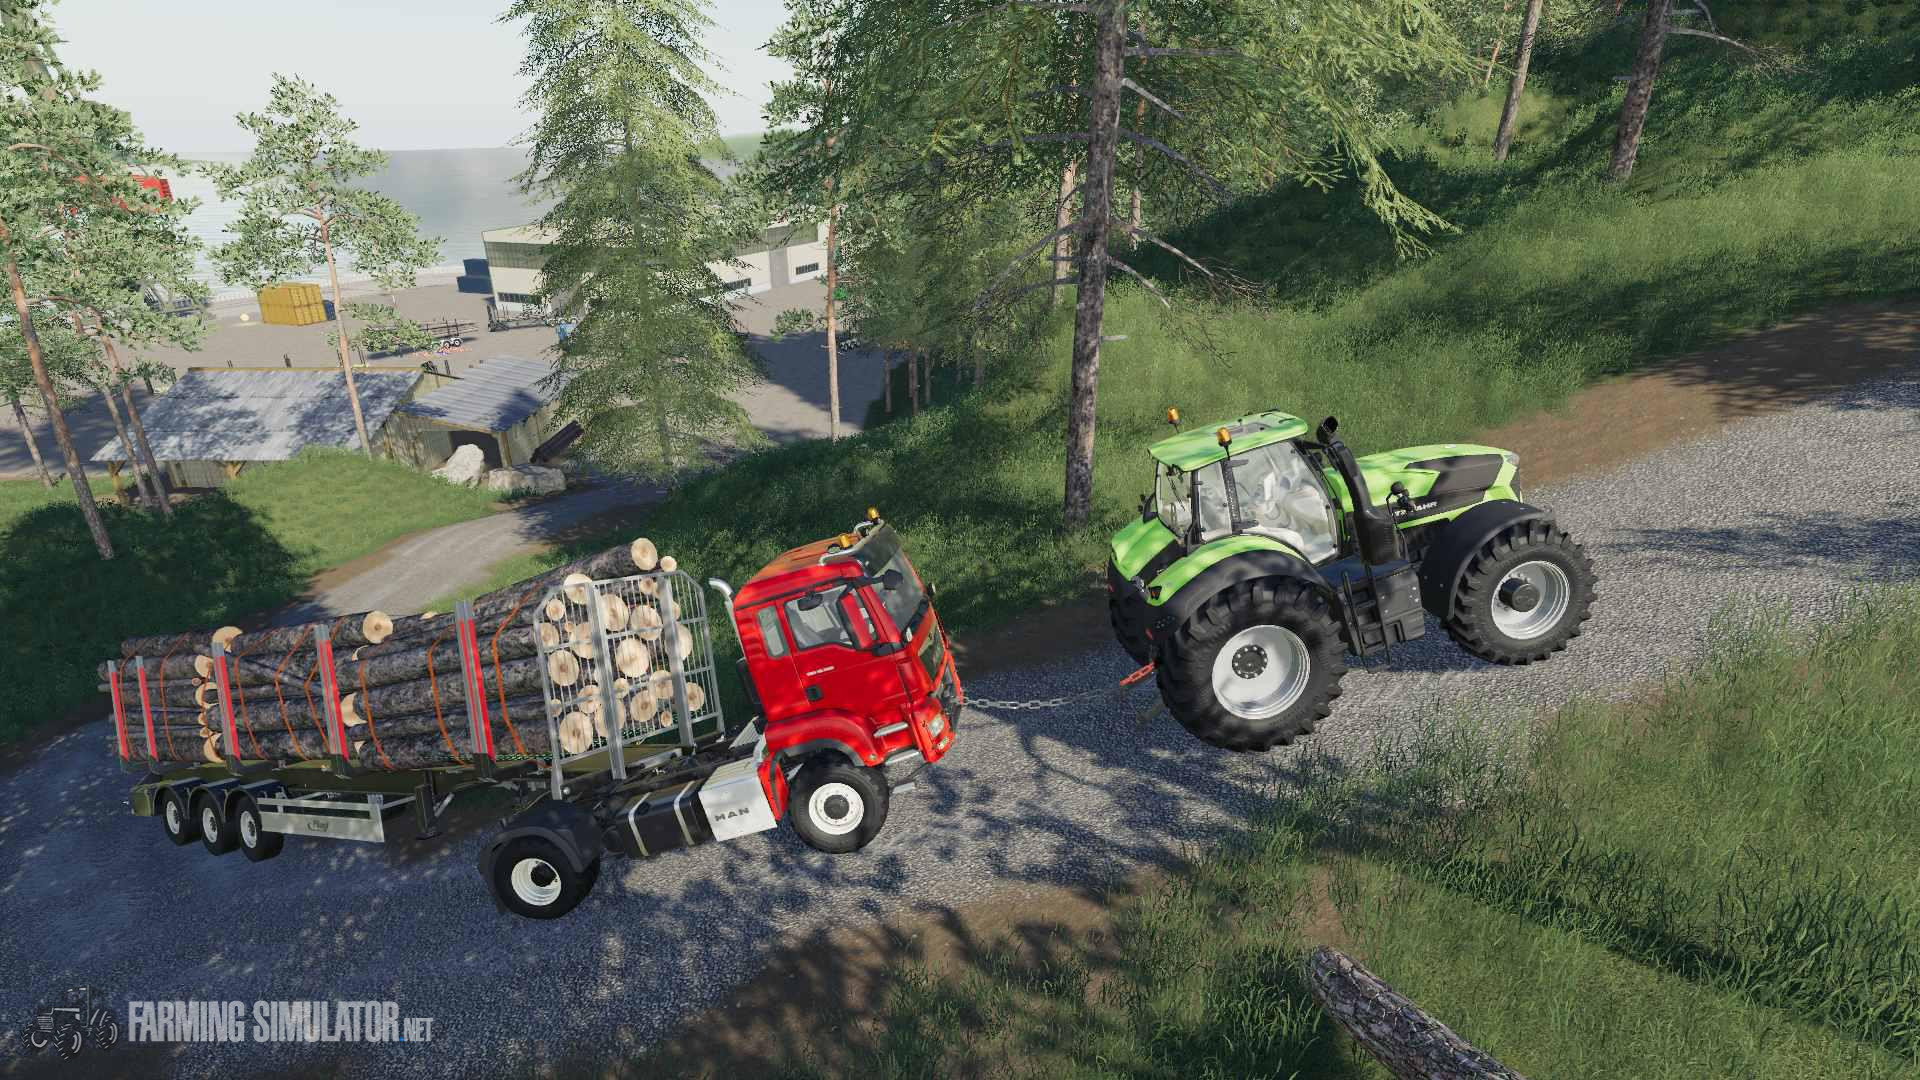 fs19 towing chain